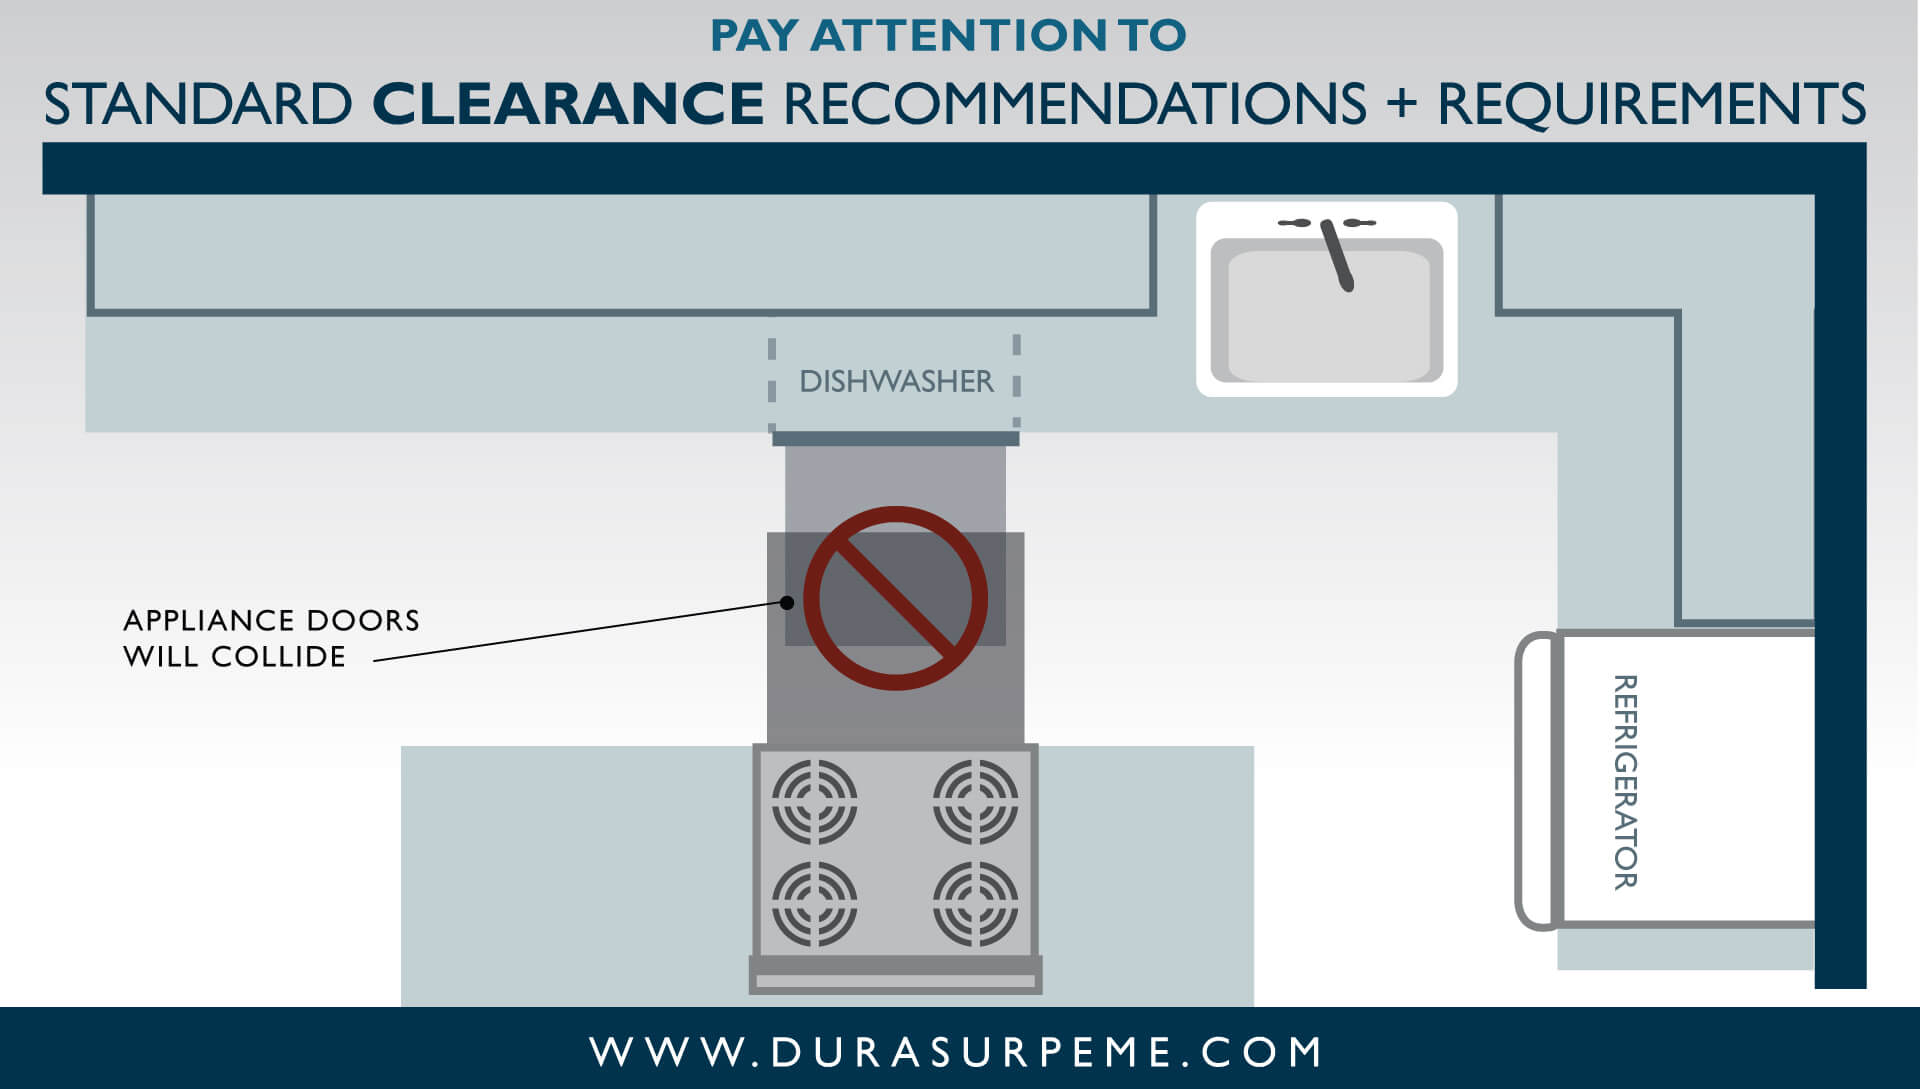 Pay Attention to Standard Clearance Recommendations and Requirements.